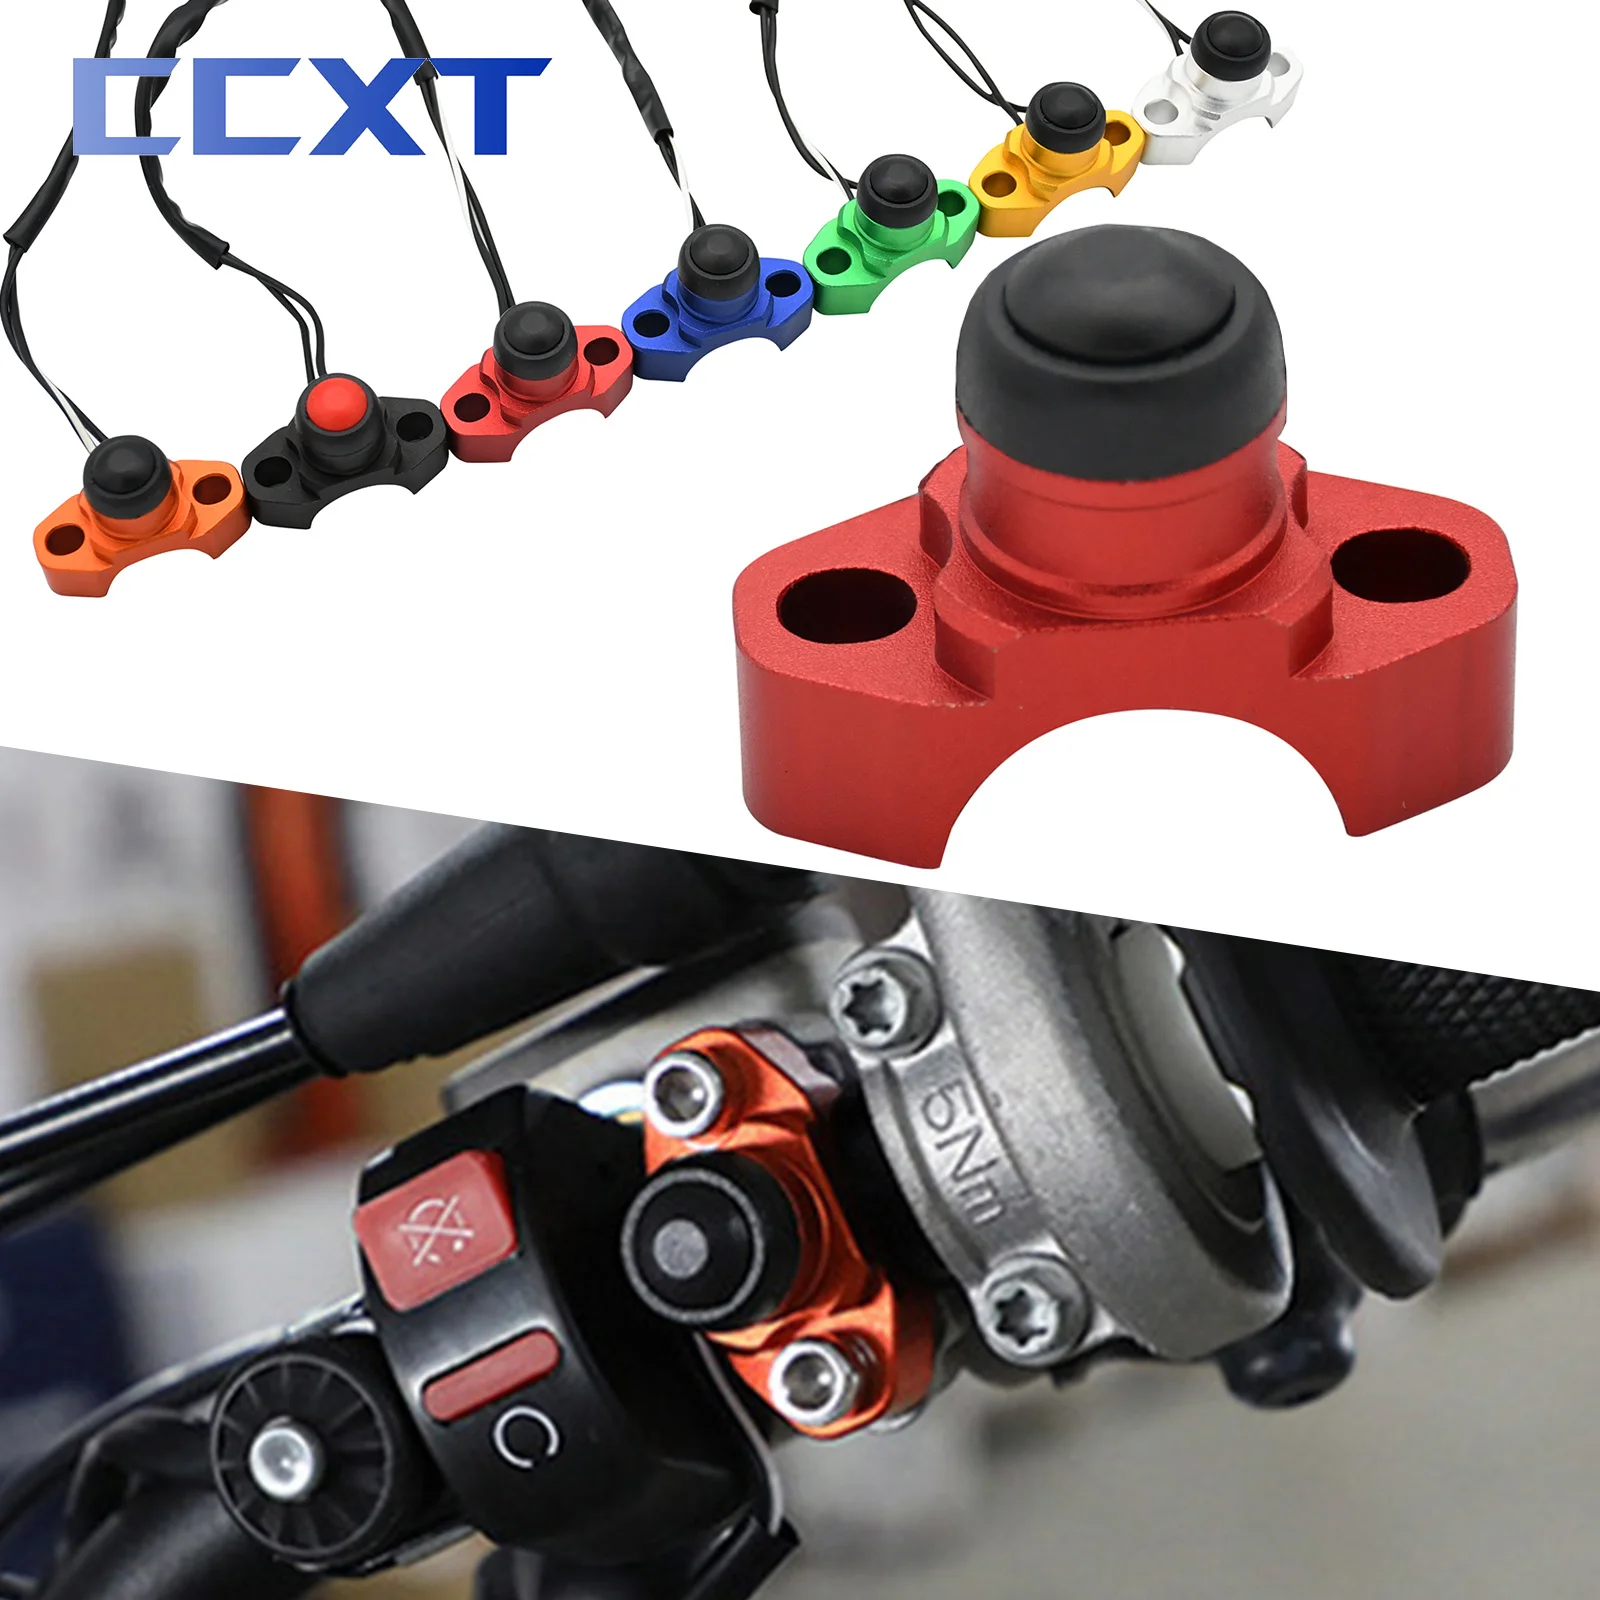 Motorcycle CNC Billet Universal Engine Stop Start Kill Switch Button For... - $15.90